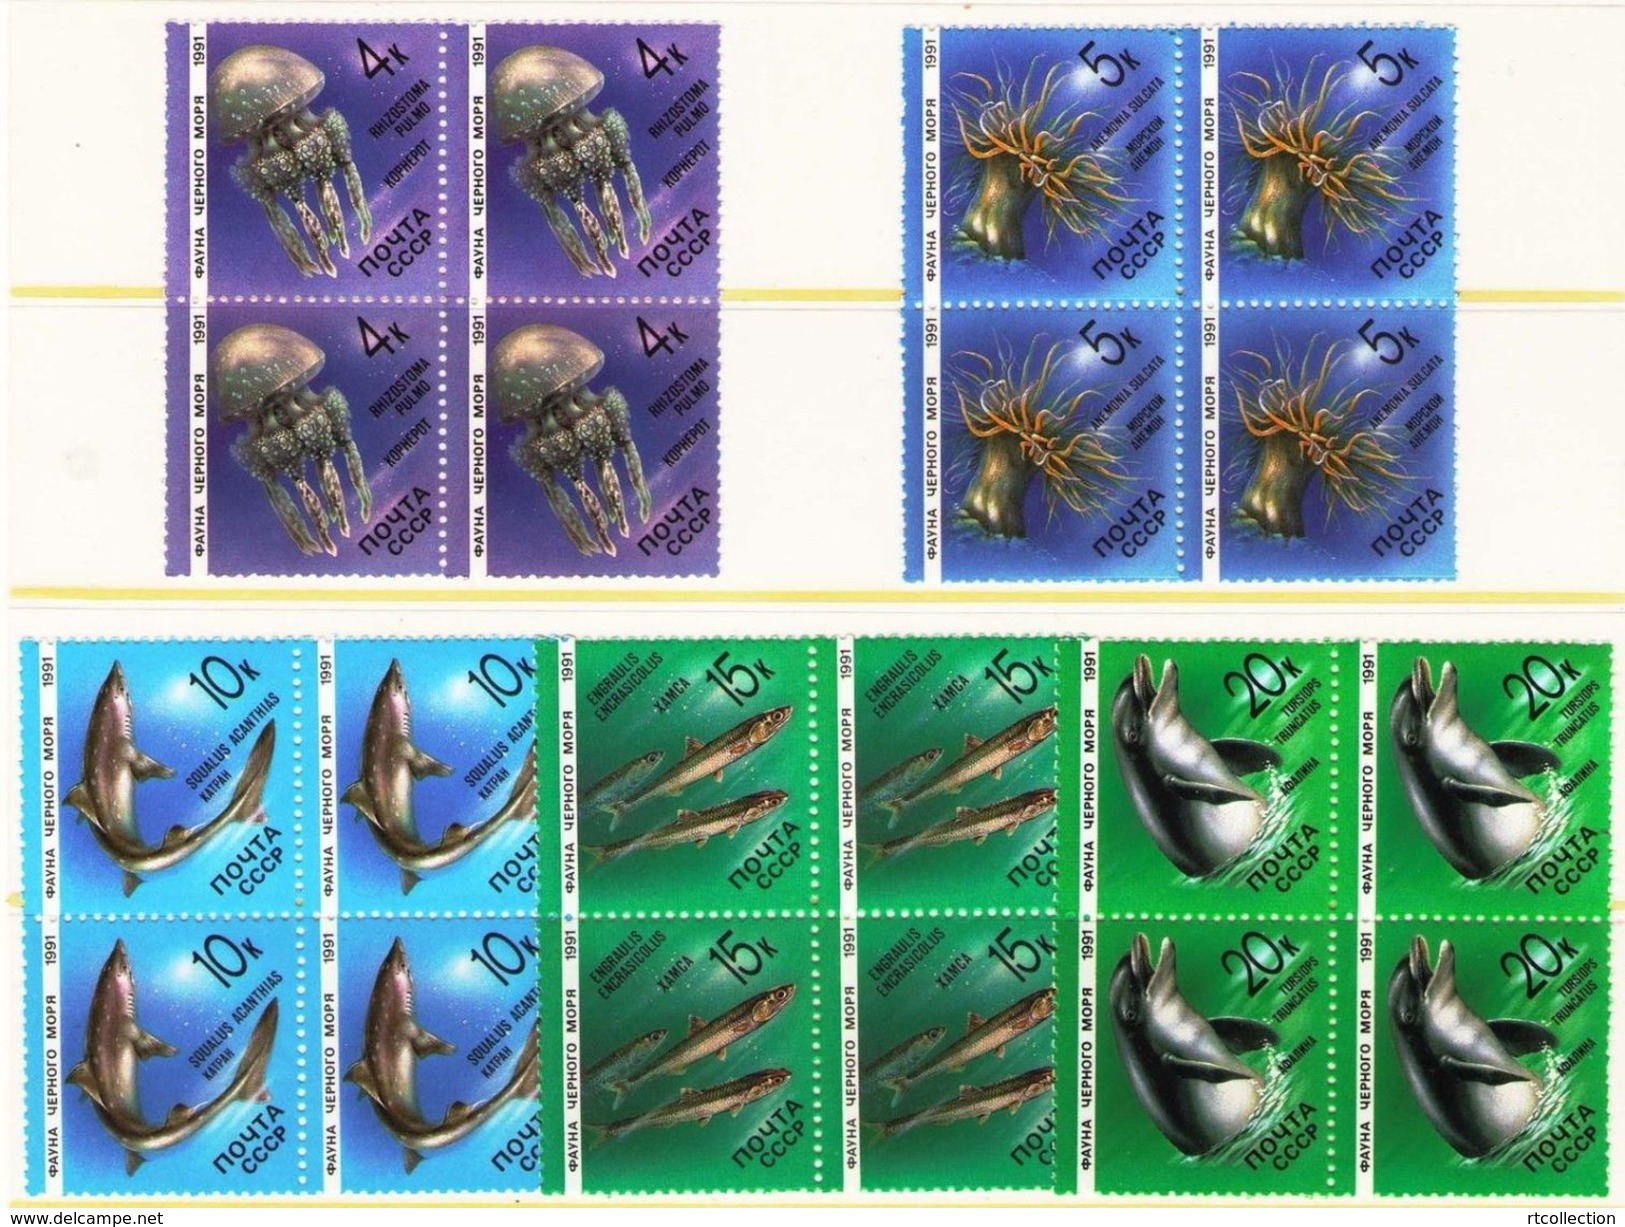 USSR Russia 1991 Block Marine Life Mammals Fauna Fishes Dolphins Sealife Sea Whales Stamps MNH Mi 6158-62 Sc 5954-58 - Dolphins